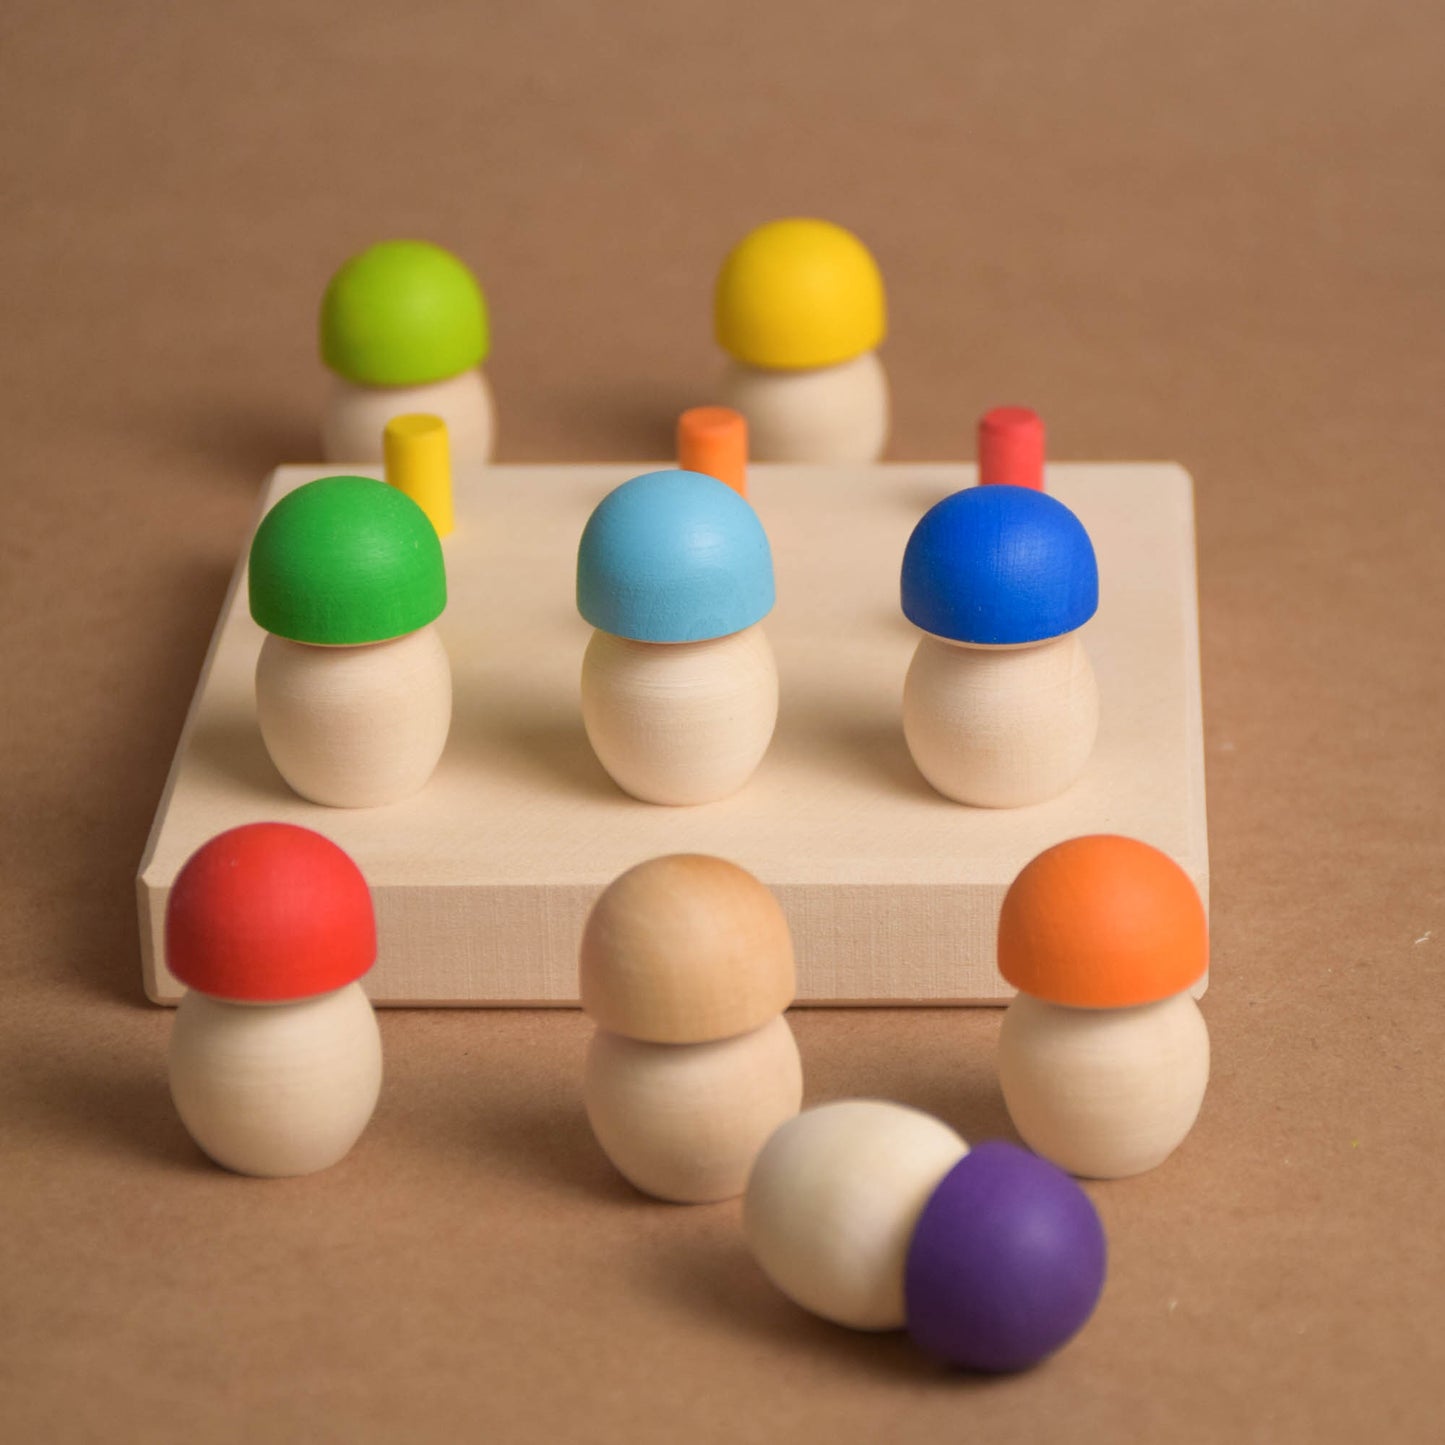 Wooden Mushrooms to Color Sorting on Geoboard